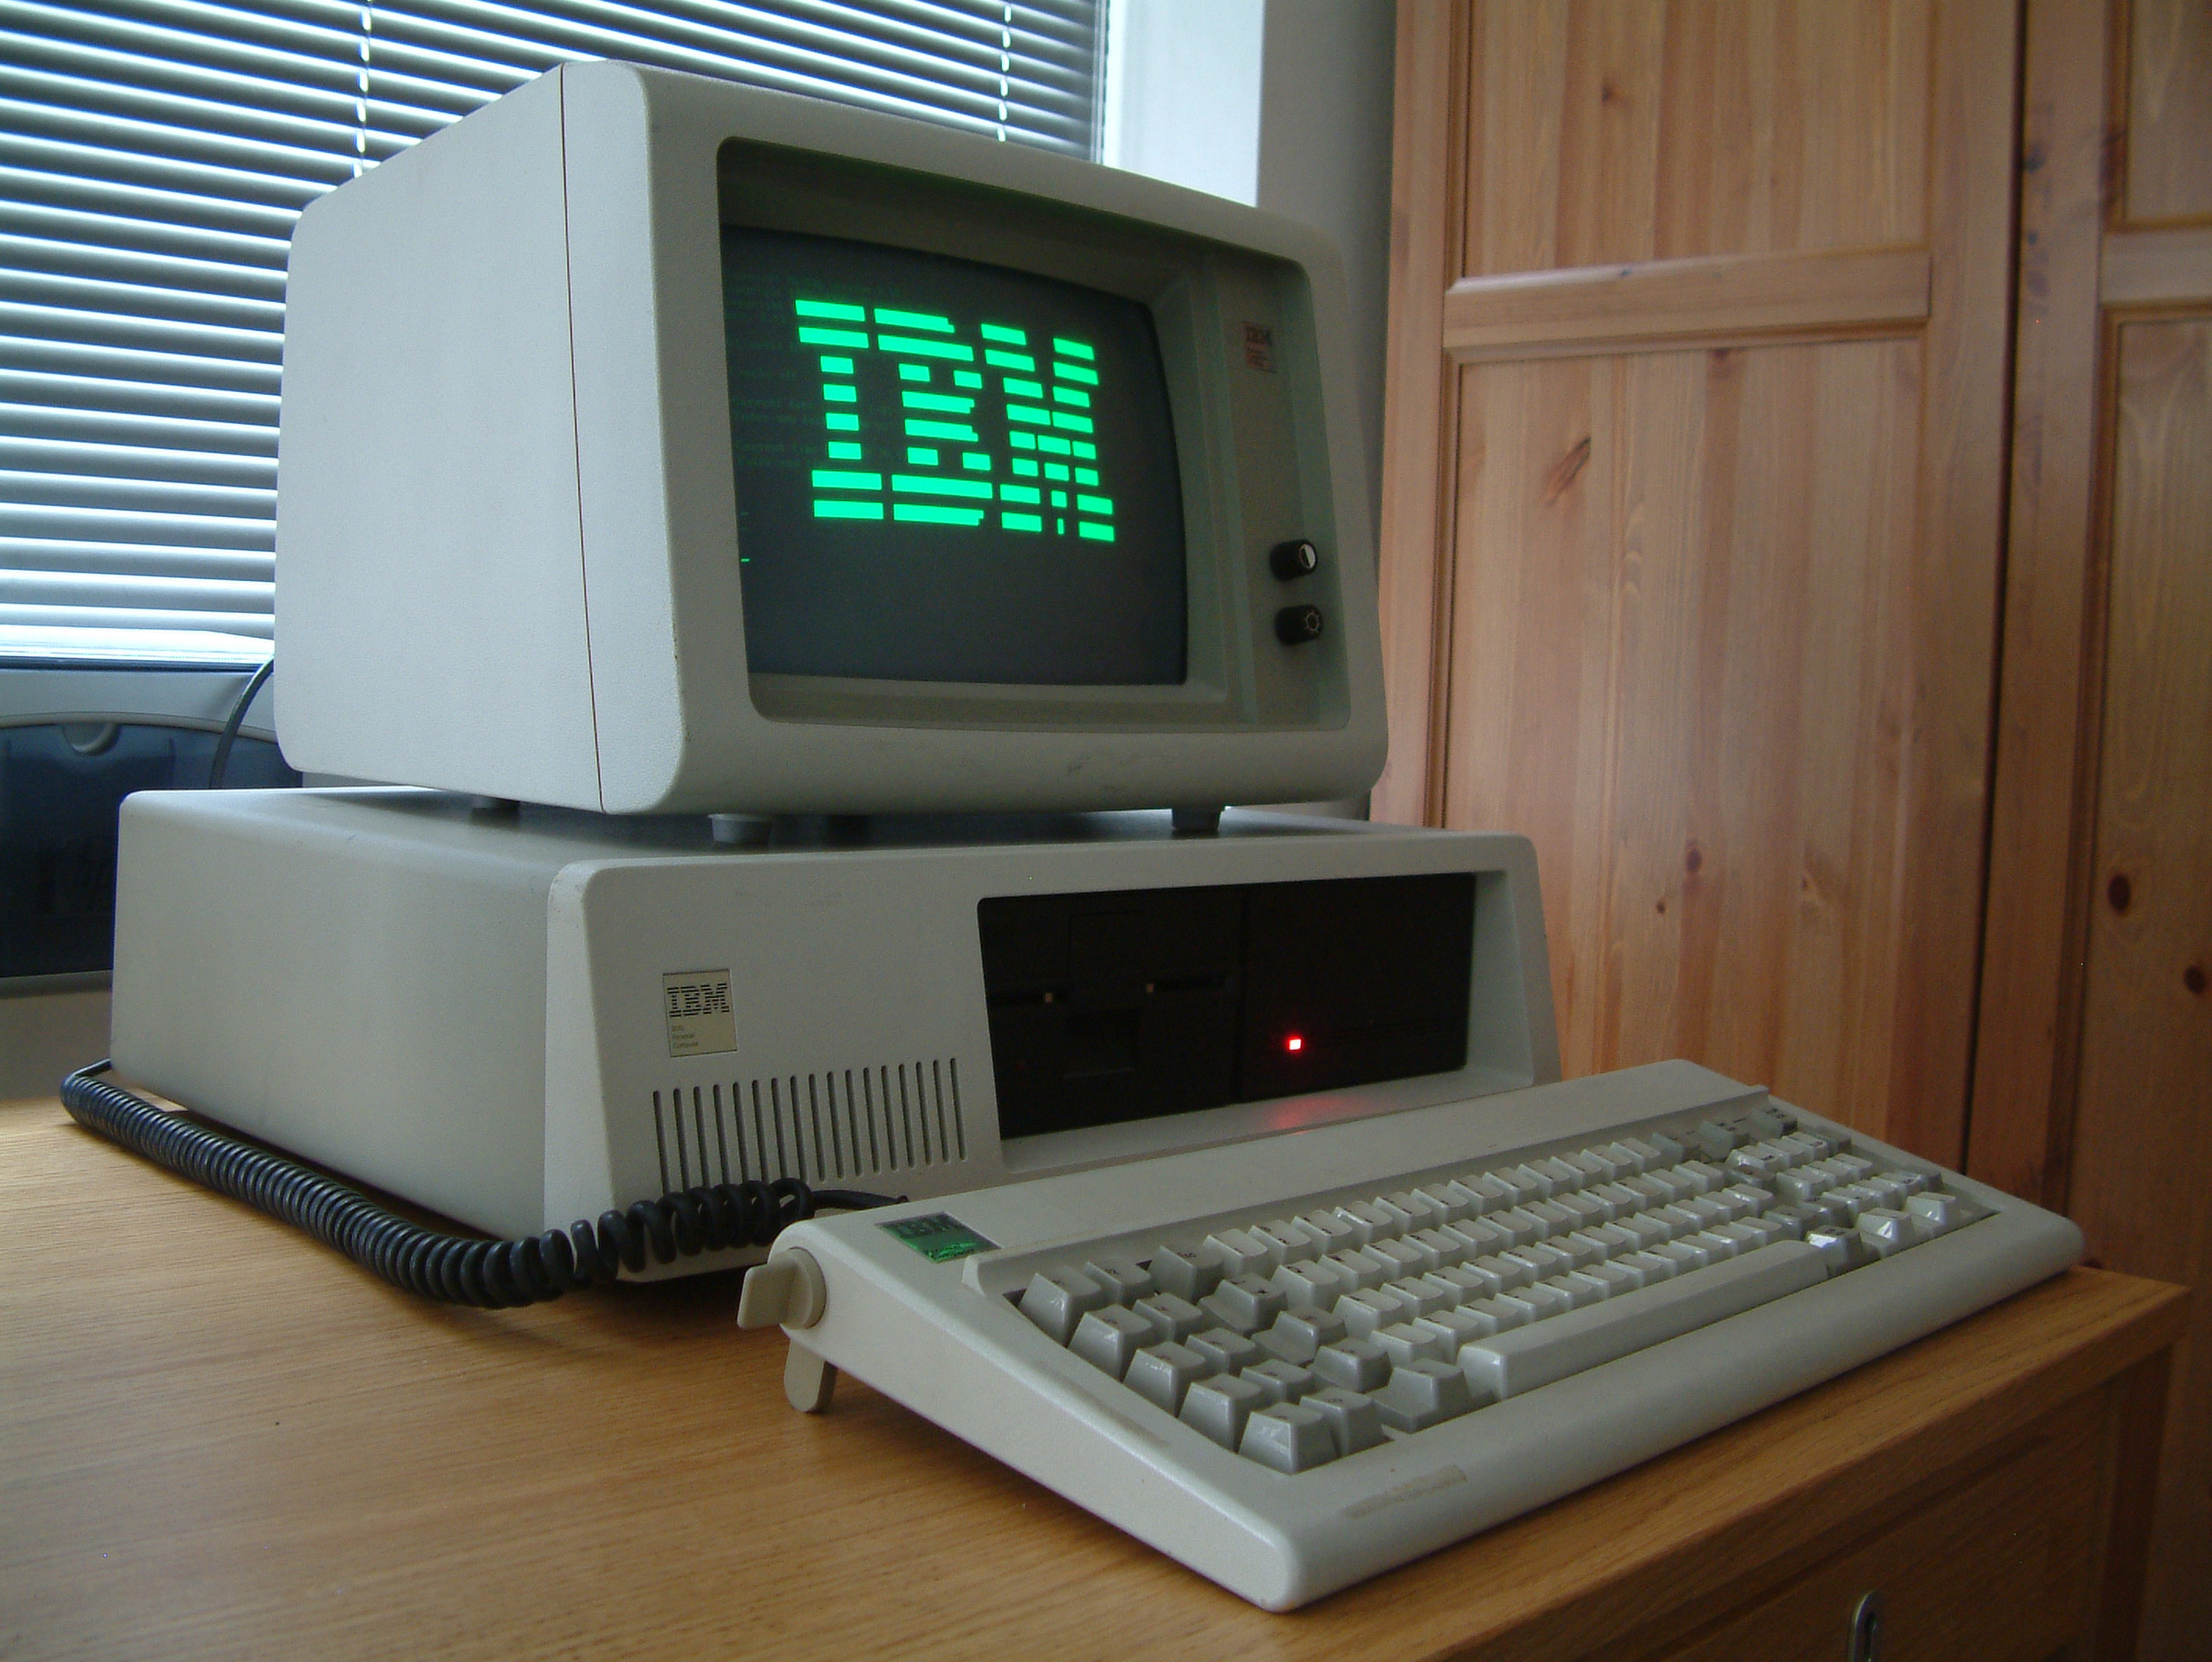 The IBM XT. 'A tedious and heavy box', as Ray describes it.